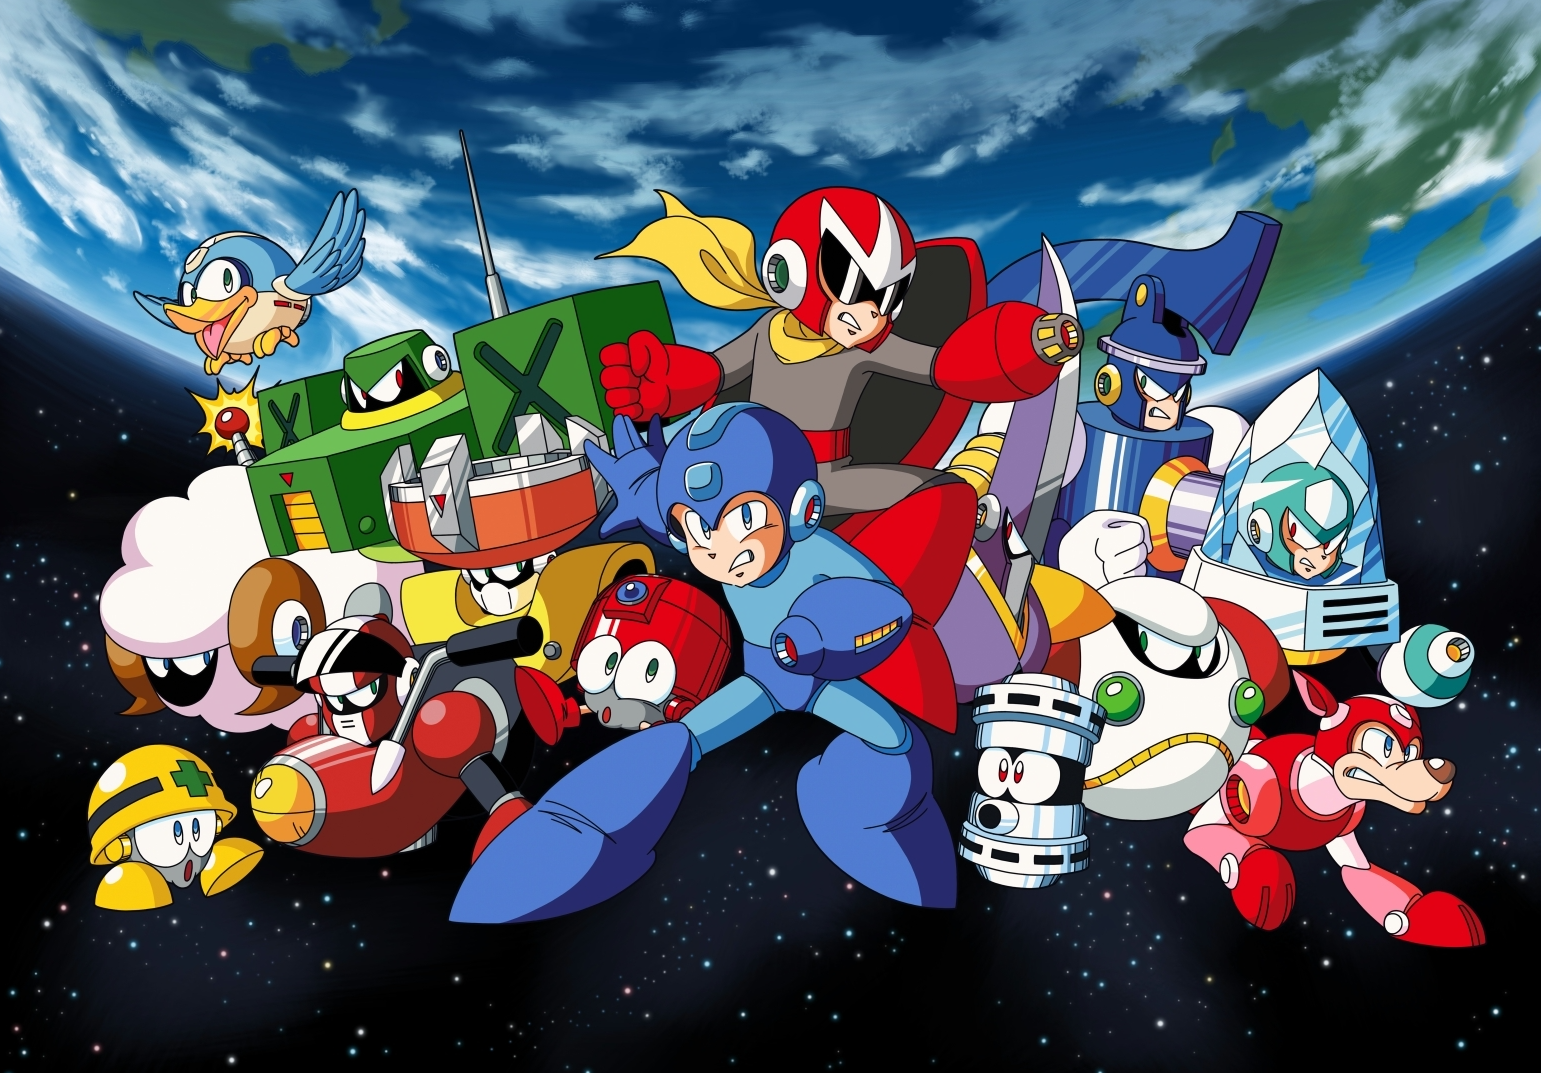 The Inviting Brutality of Mega Man